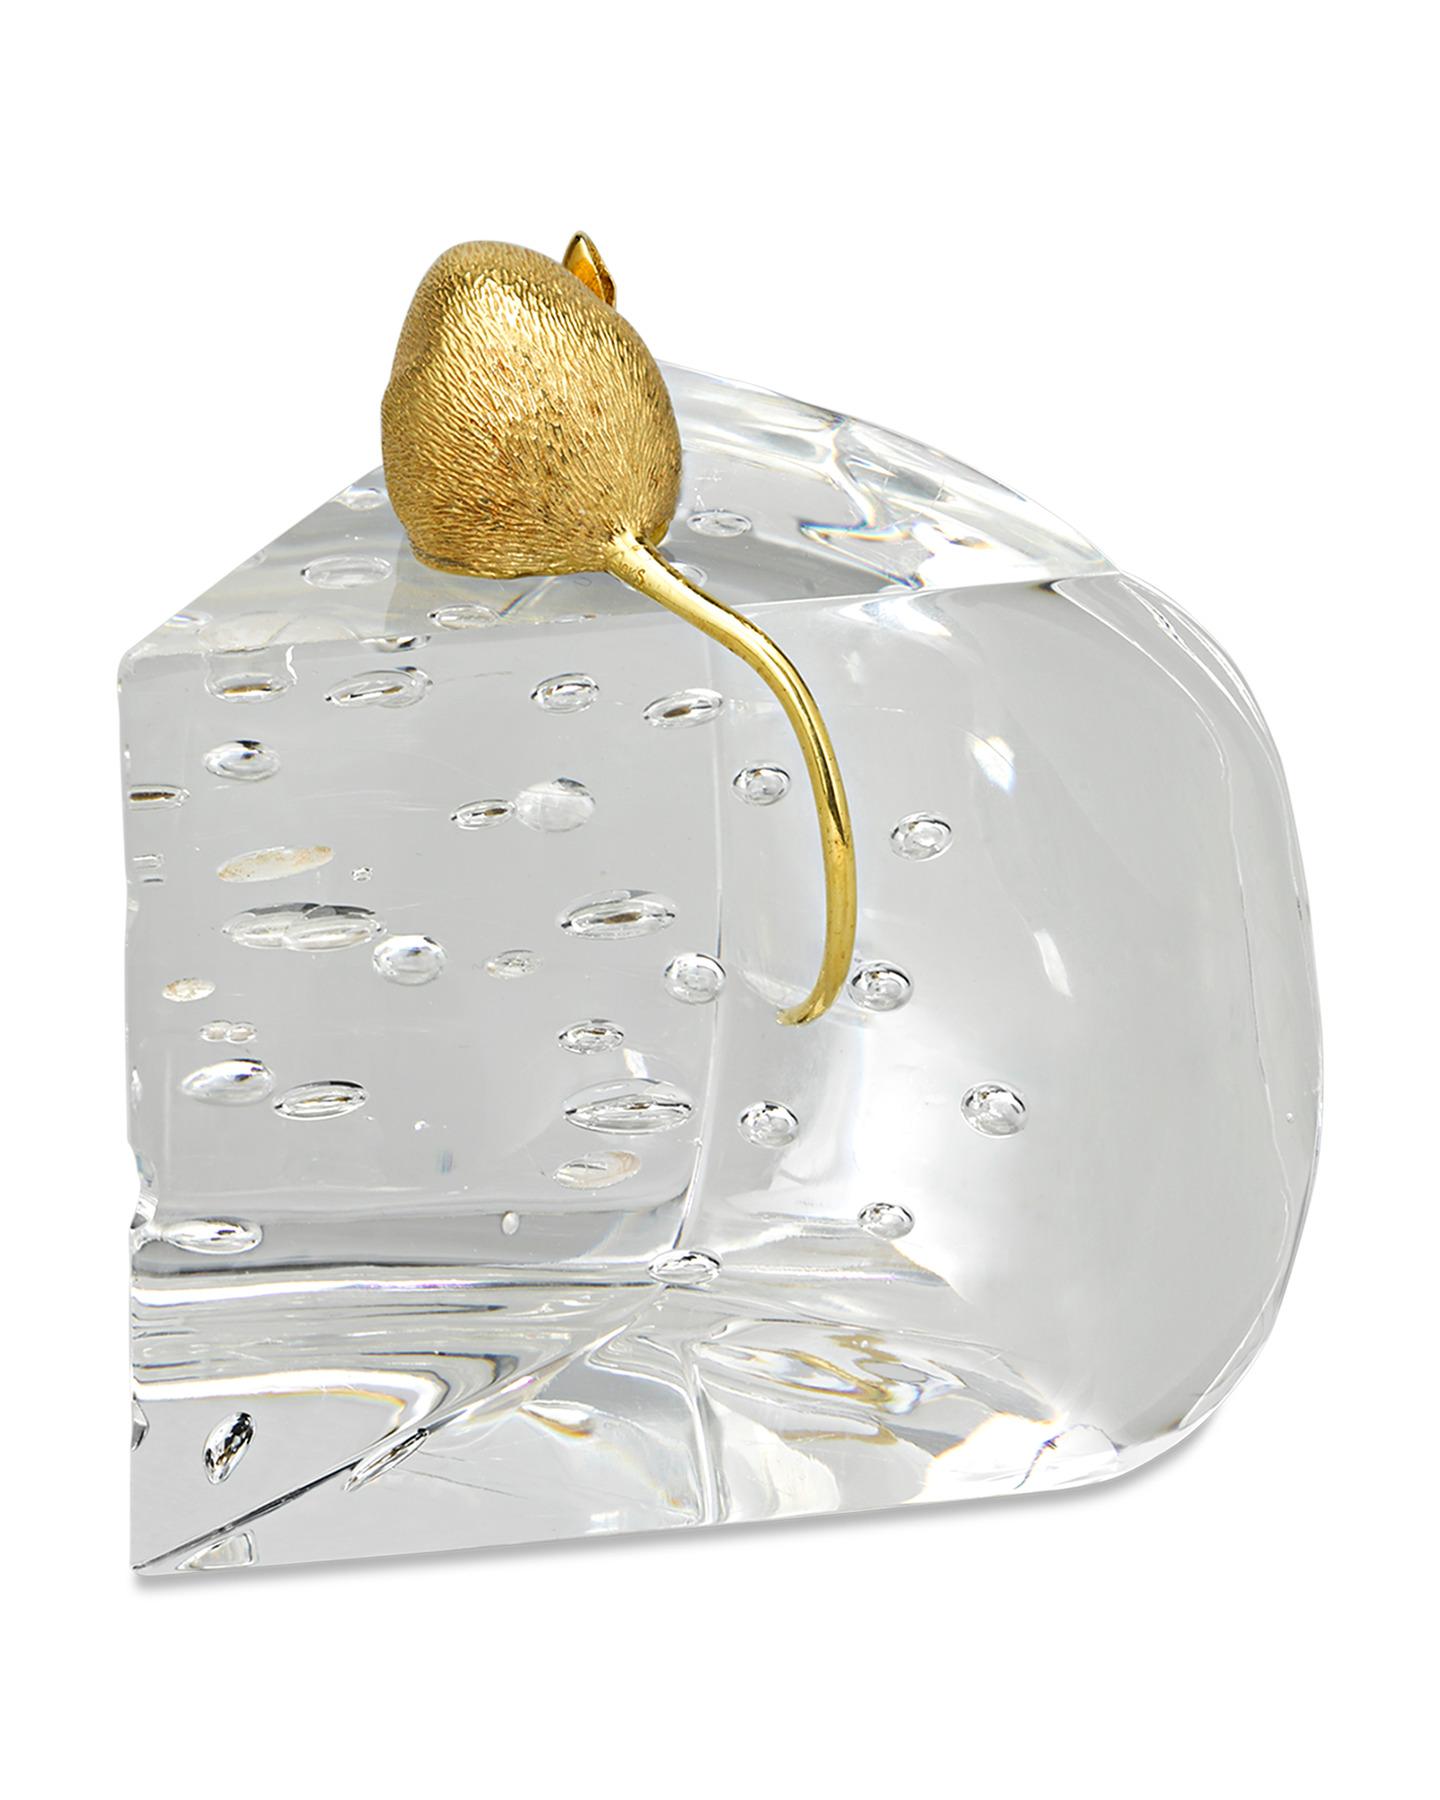 Depicting a mouse atop a slice of cheese, this charming crystal creation was crafted by the famed American glassmakers Steuben Glass Works. The diminutive objet d'art was designed by the famed Steuben designer James Houston, who brilliantly